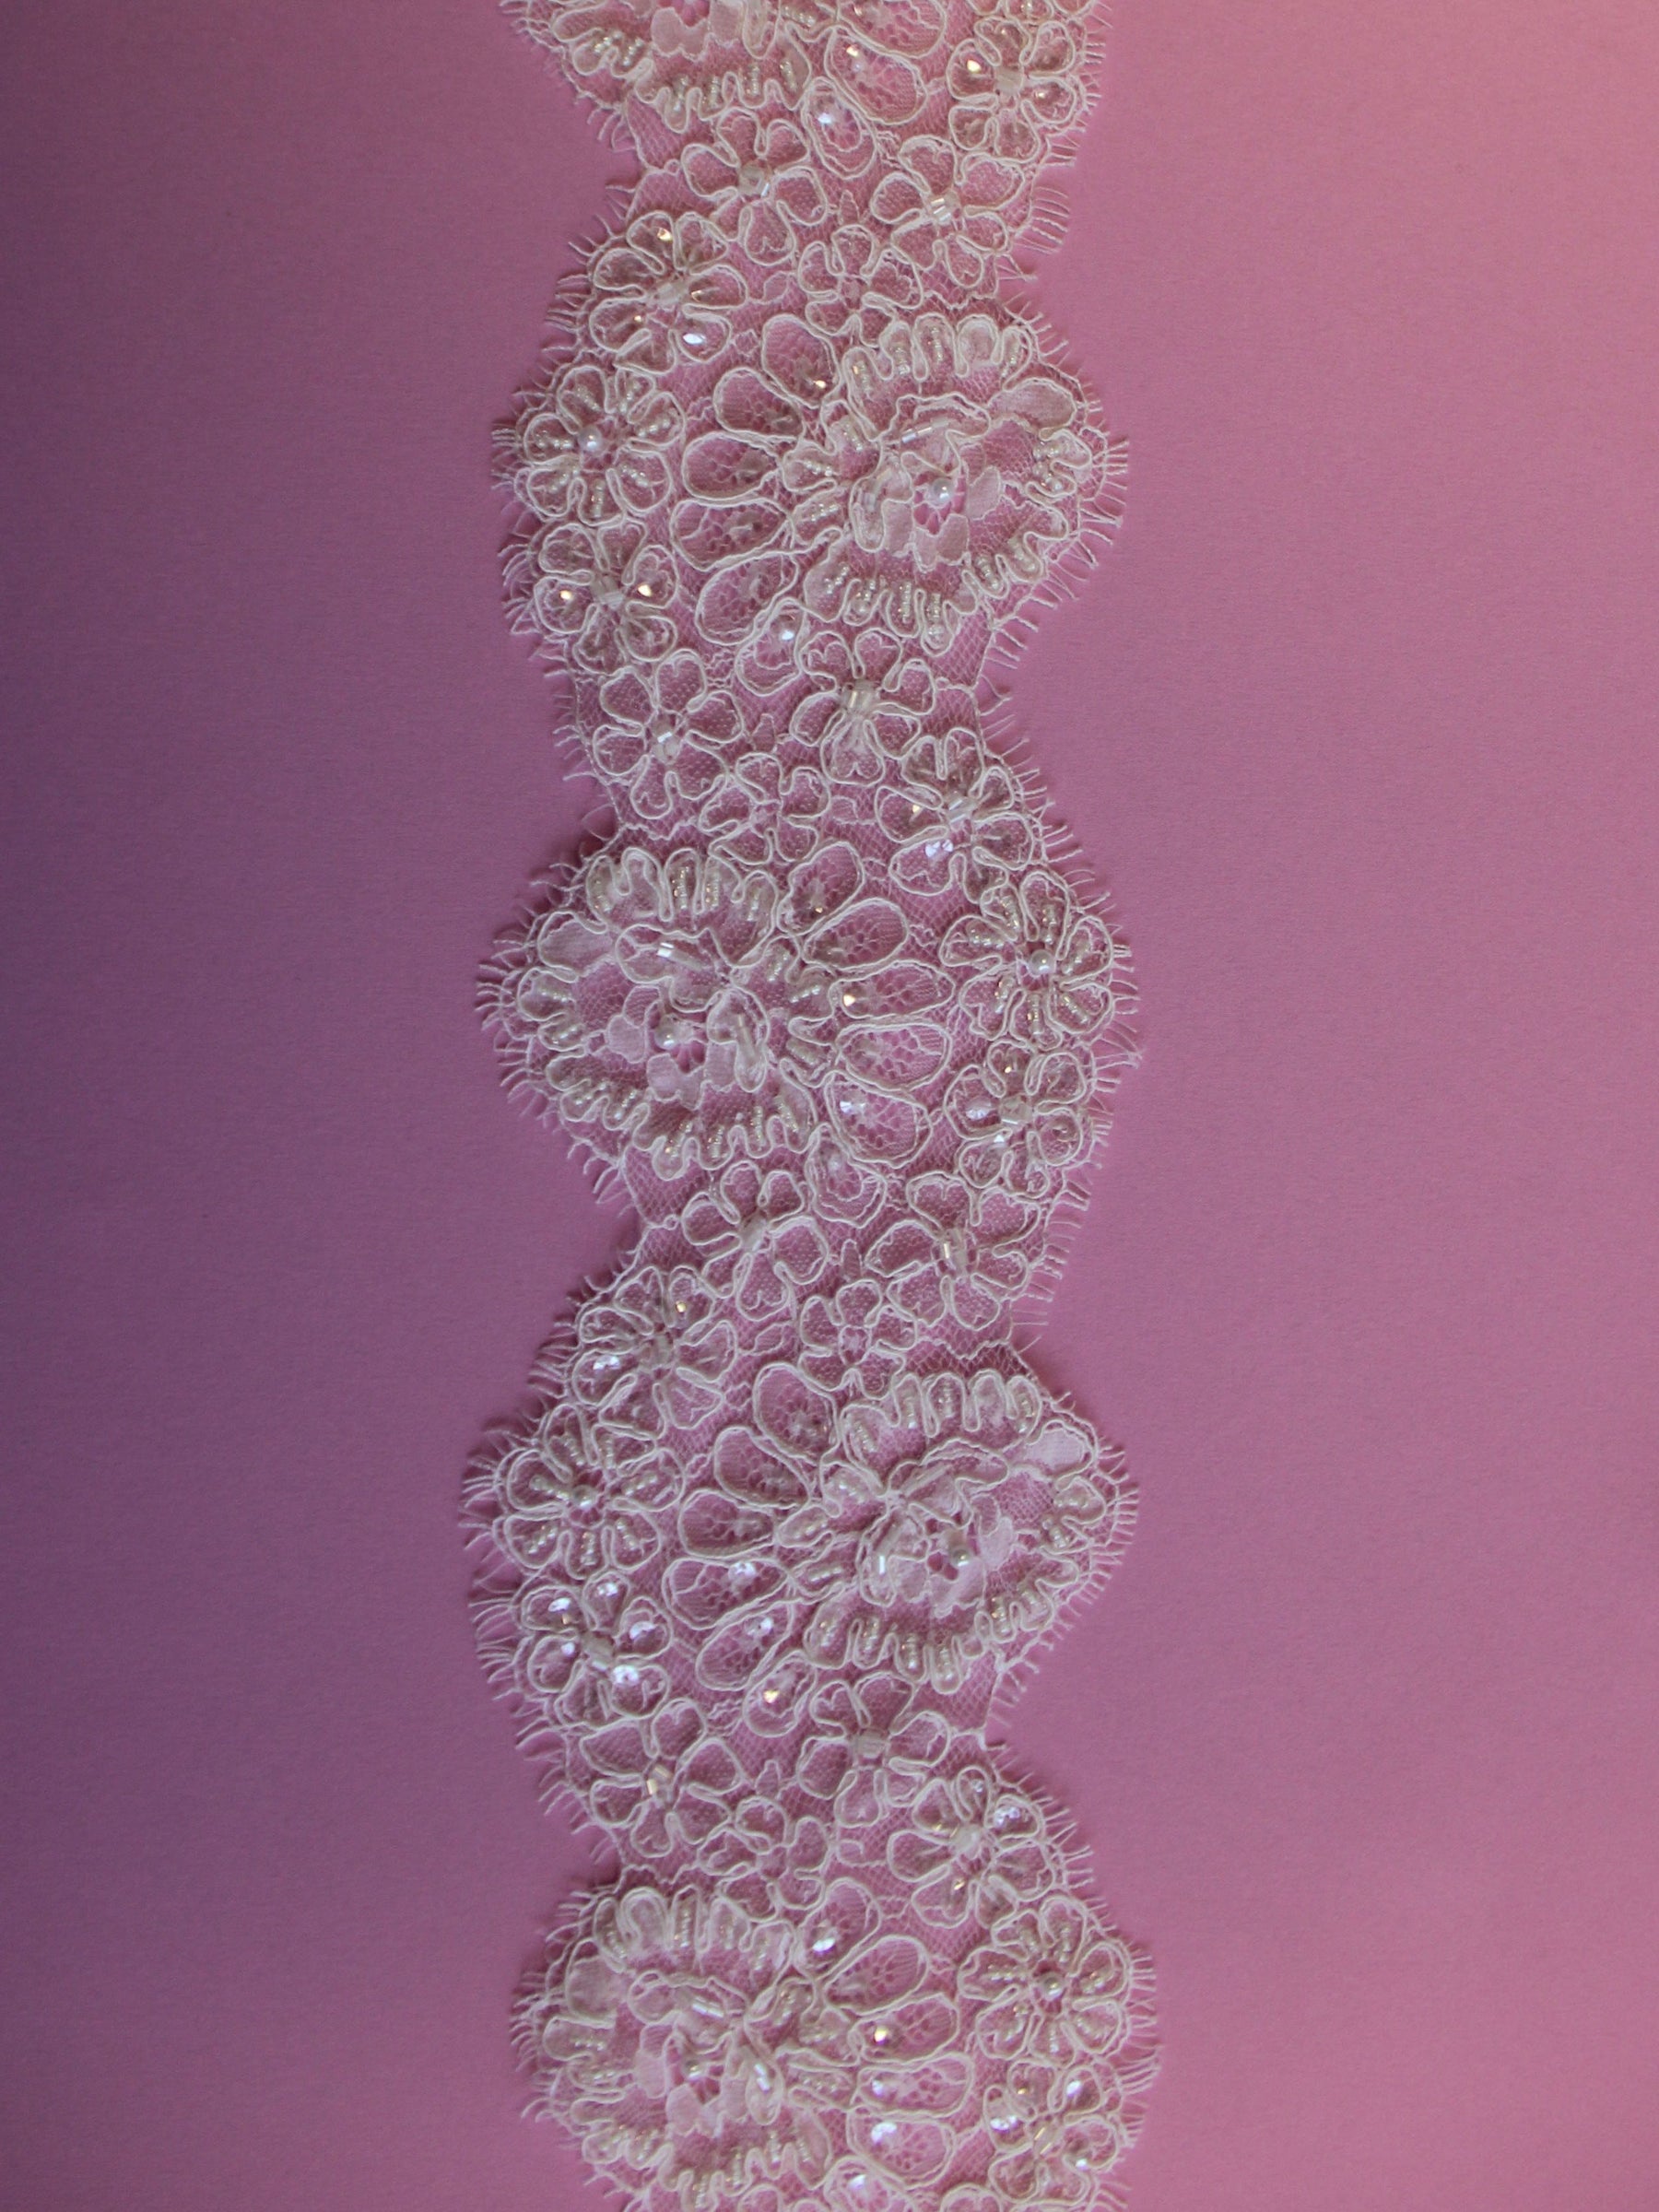 Ivory Corded & Beaded Lace Trim - Wisconsin